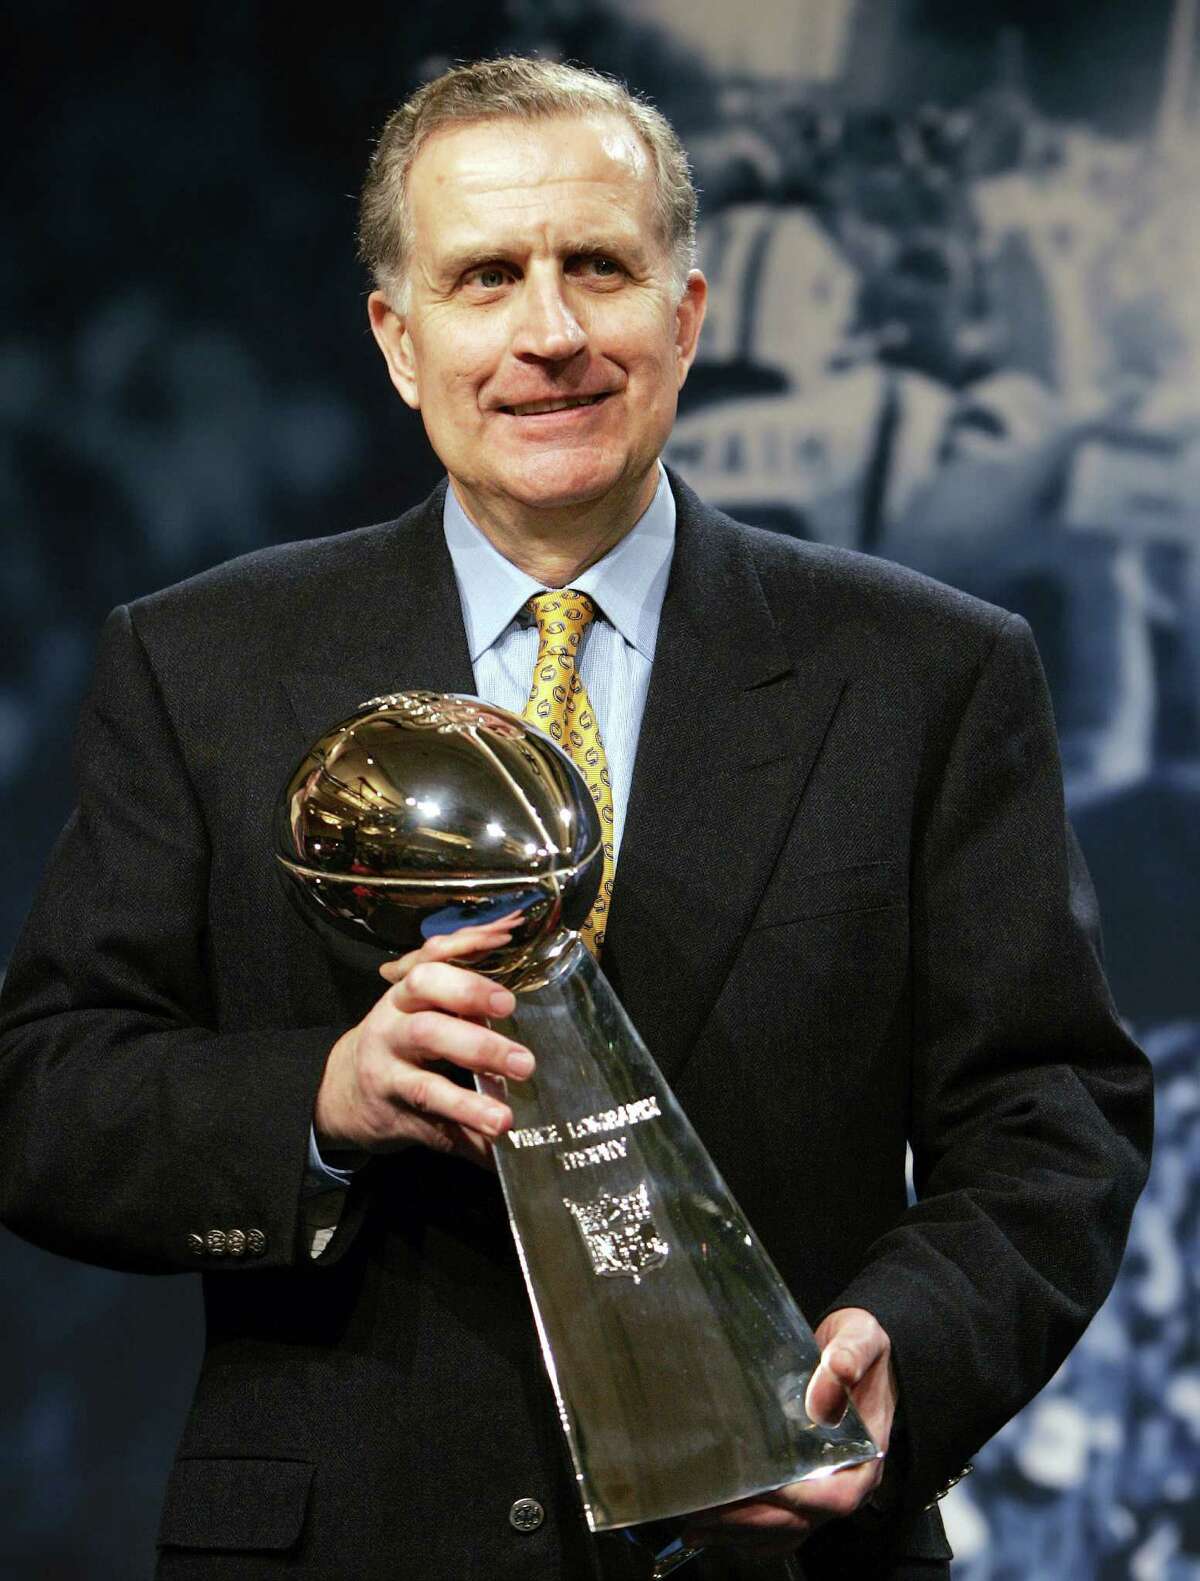 NFL Commissioner Paul Tagliabue holds the Vince Lombardi Trophy after delivering his State of the NFL remarks in Detroit Friday, Feb. 3, 2006. Tagliabue announced in a statement Monday March 20, 2006 that he is retiring as NFL commissioner in July, after more than 16 years on the job (AP Photo/Chuck Burton)